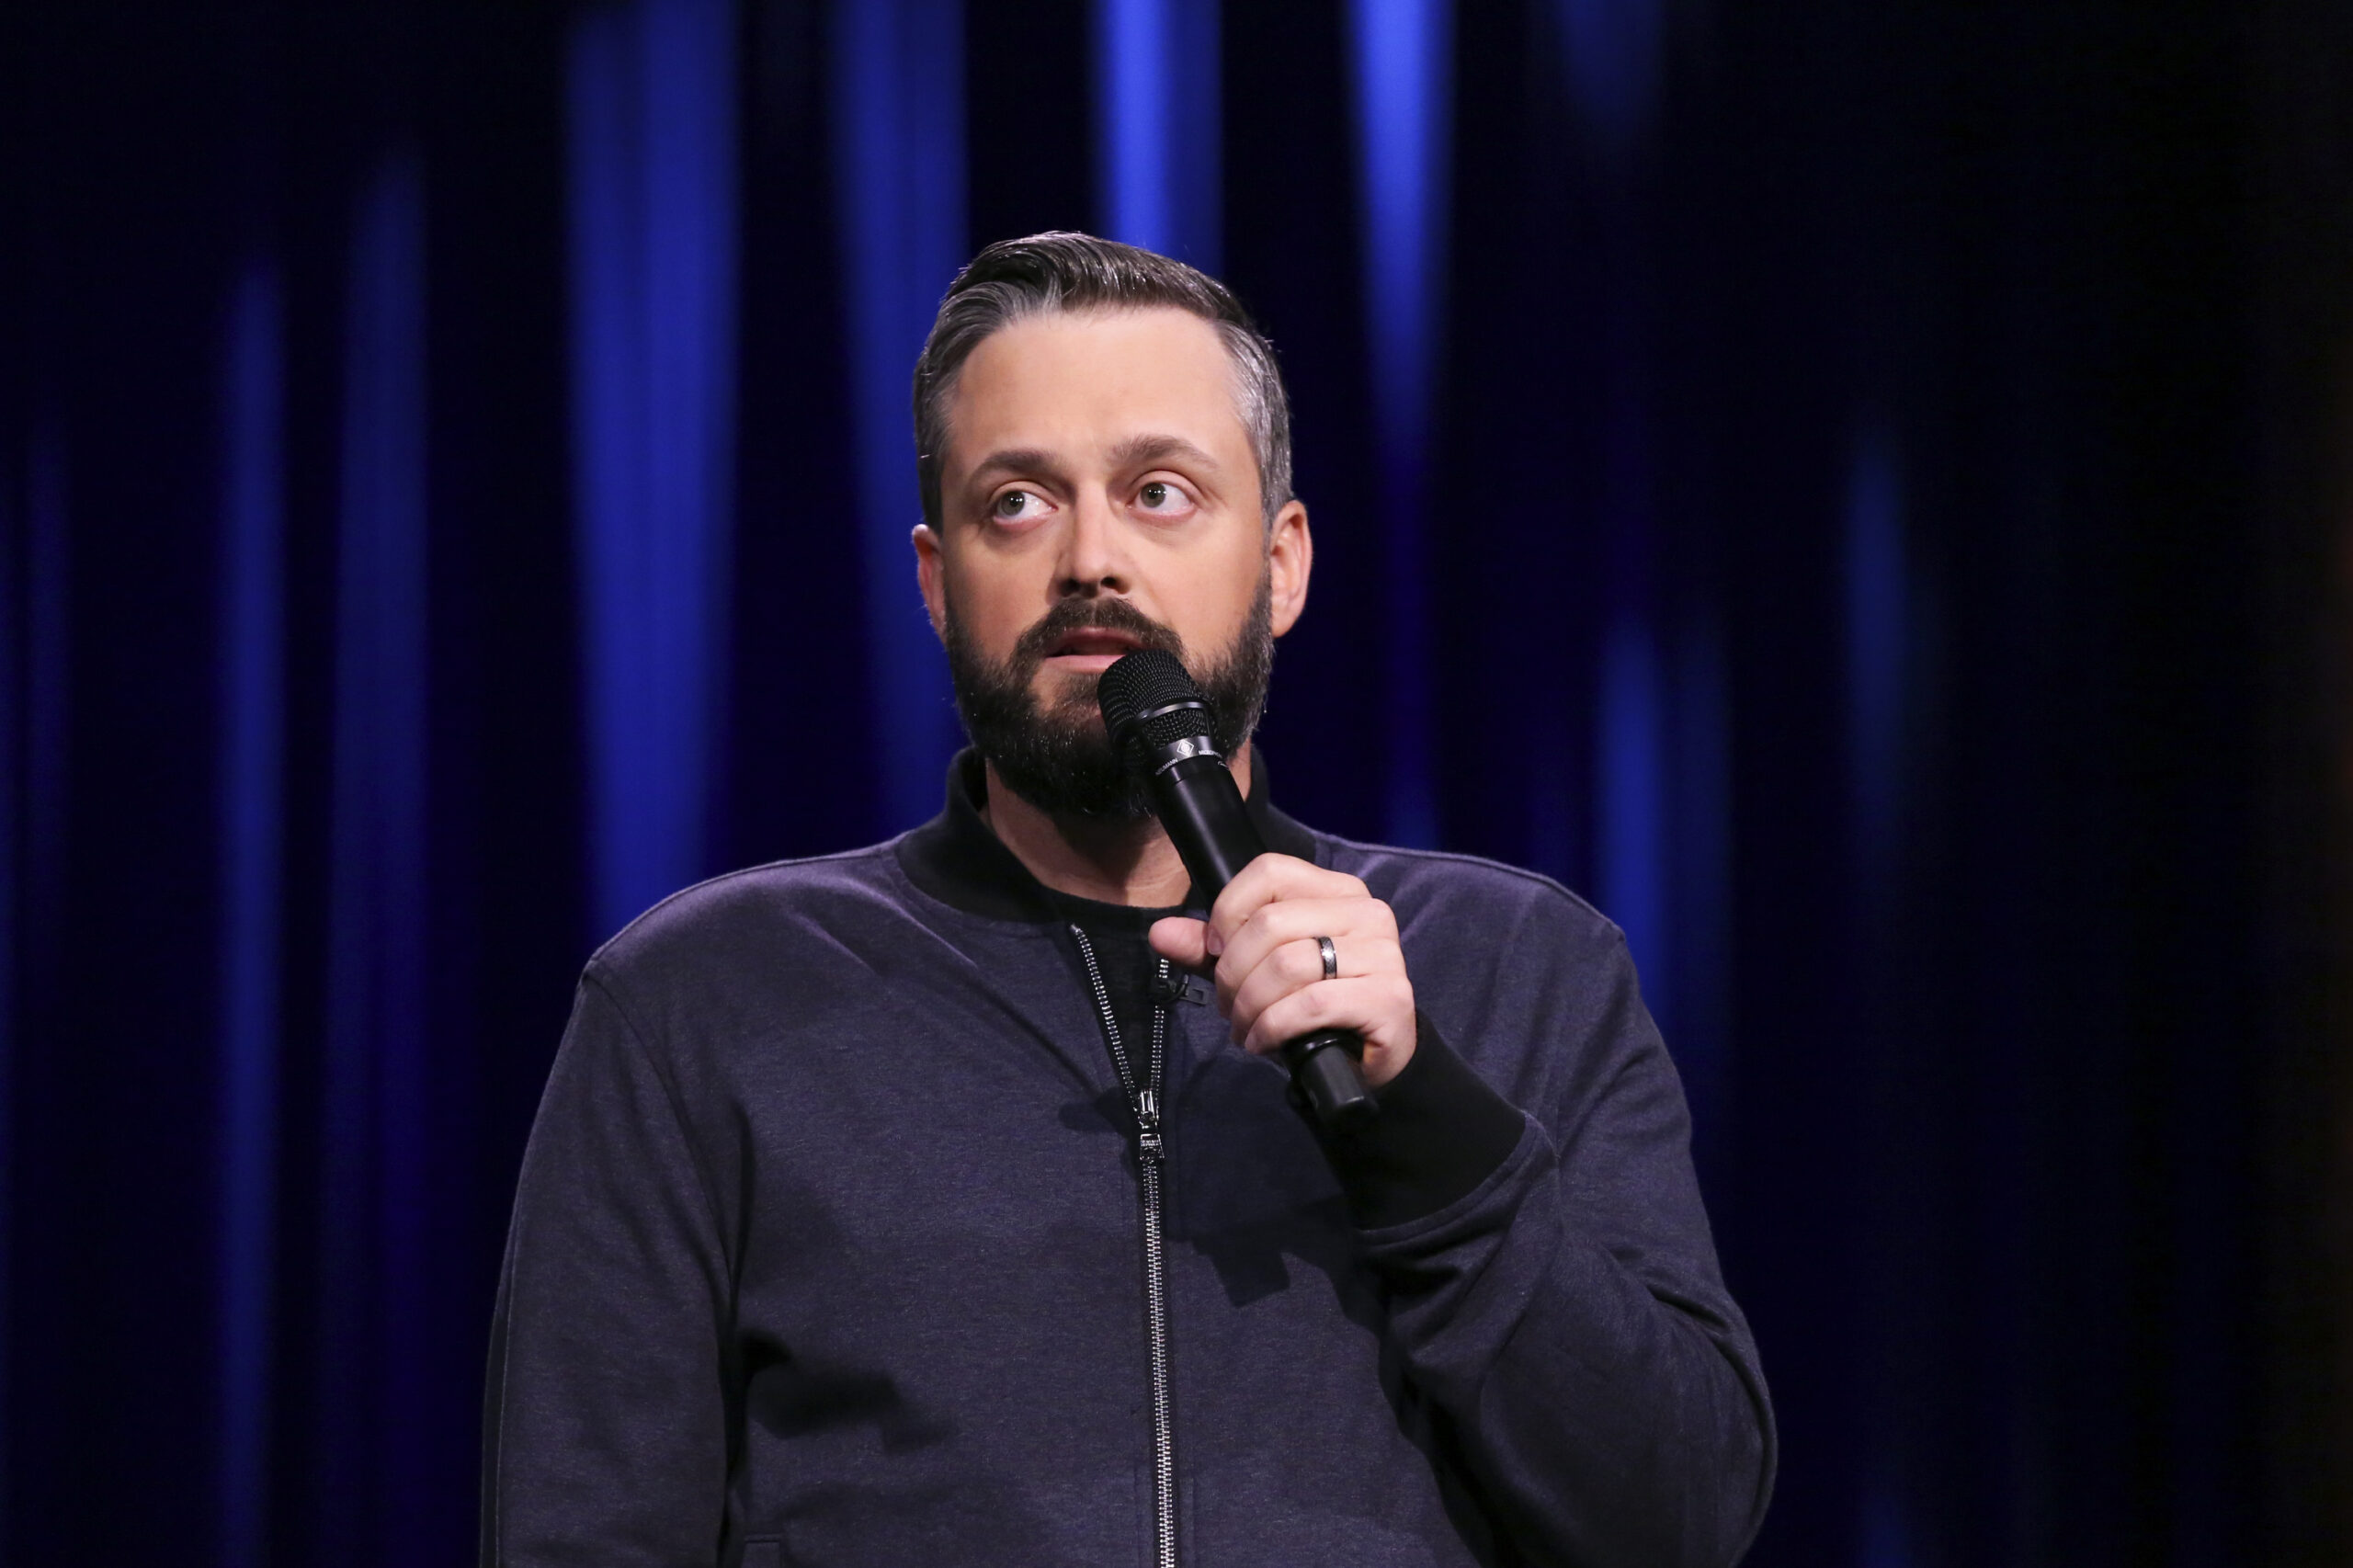 ‘Jesus Had More Fun Than I Did’: Nate Bargatze Jokes About His Religion, Family And More In New Comedy Special